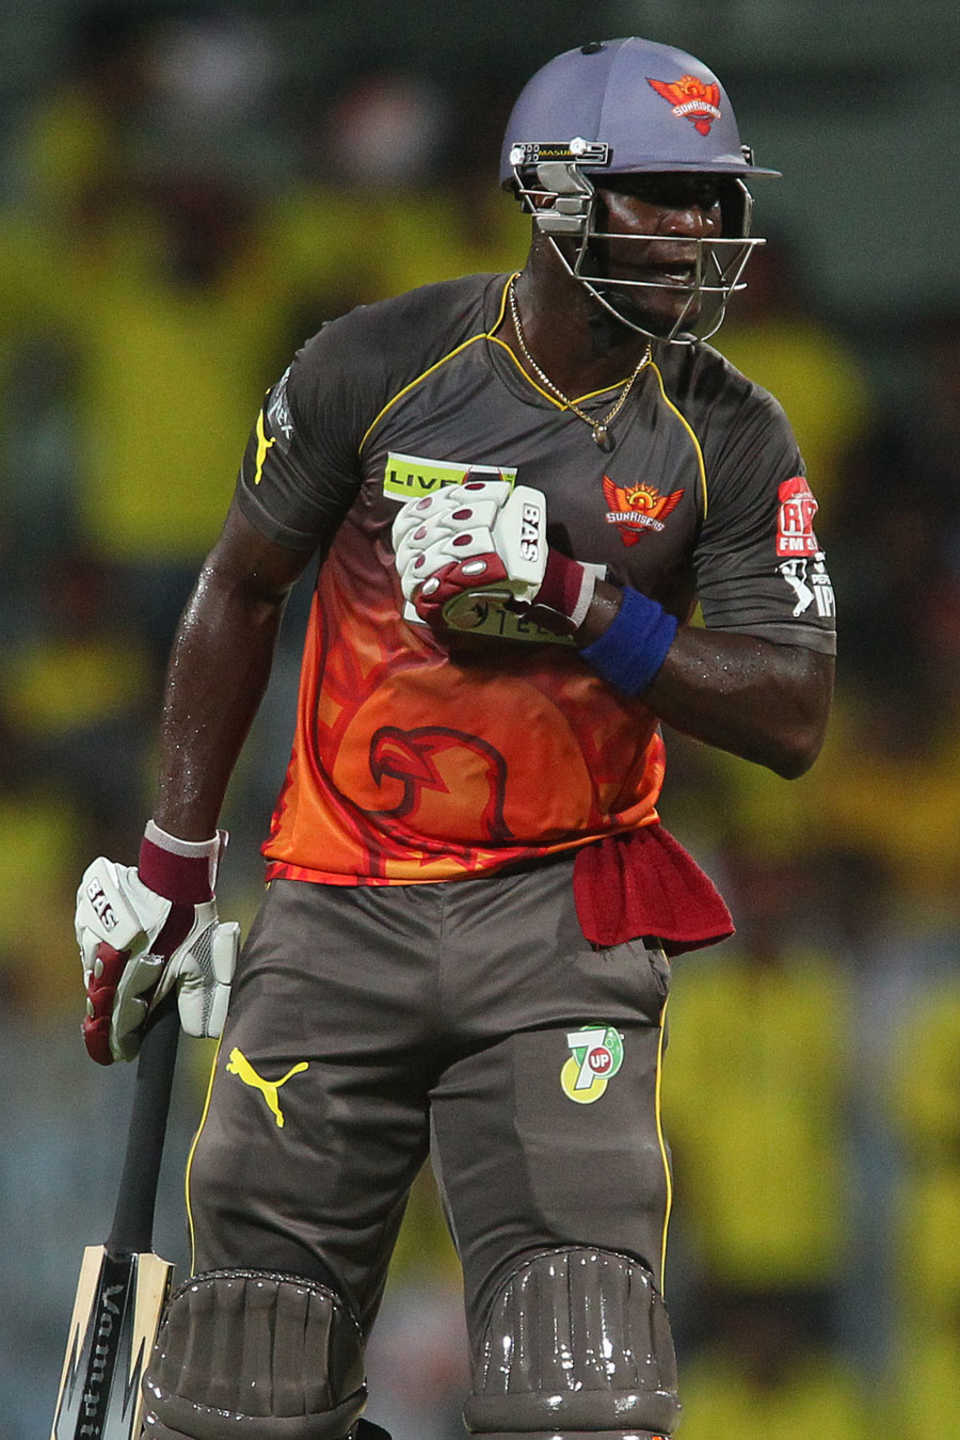 Daren Sammy on his time with Sunrisers Hyderabad: "I believed we were operating from brotherly love. I still believe that. That's why it's important to have a conversation"